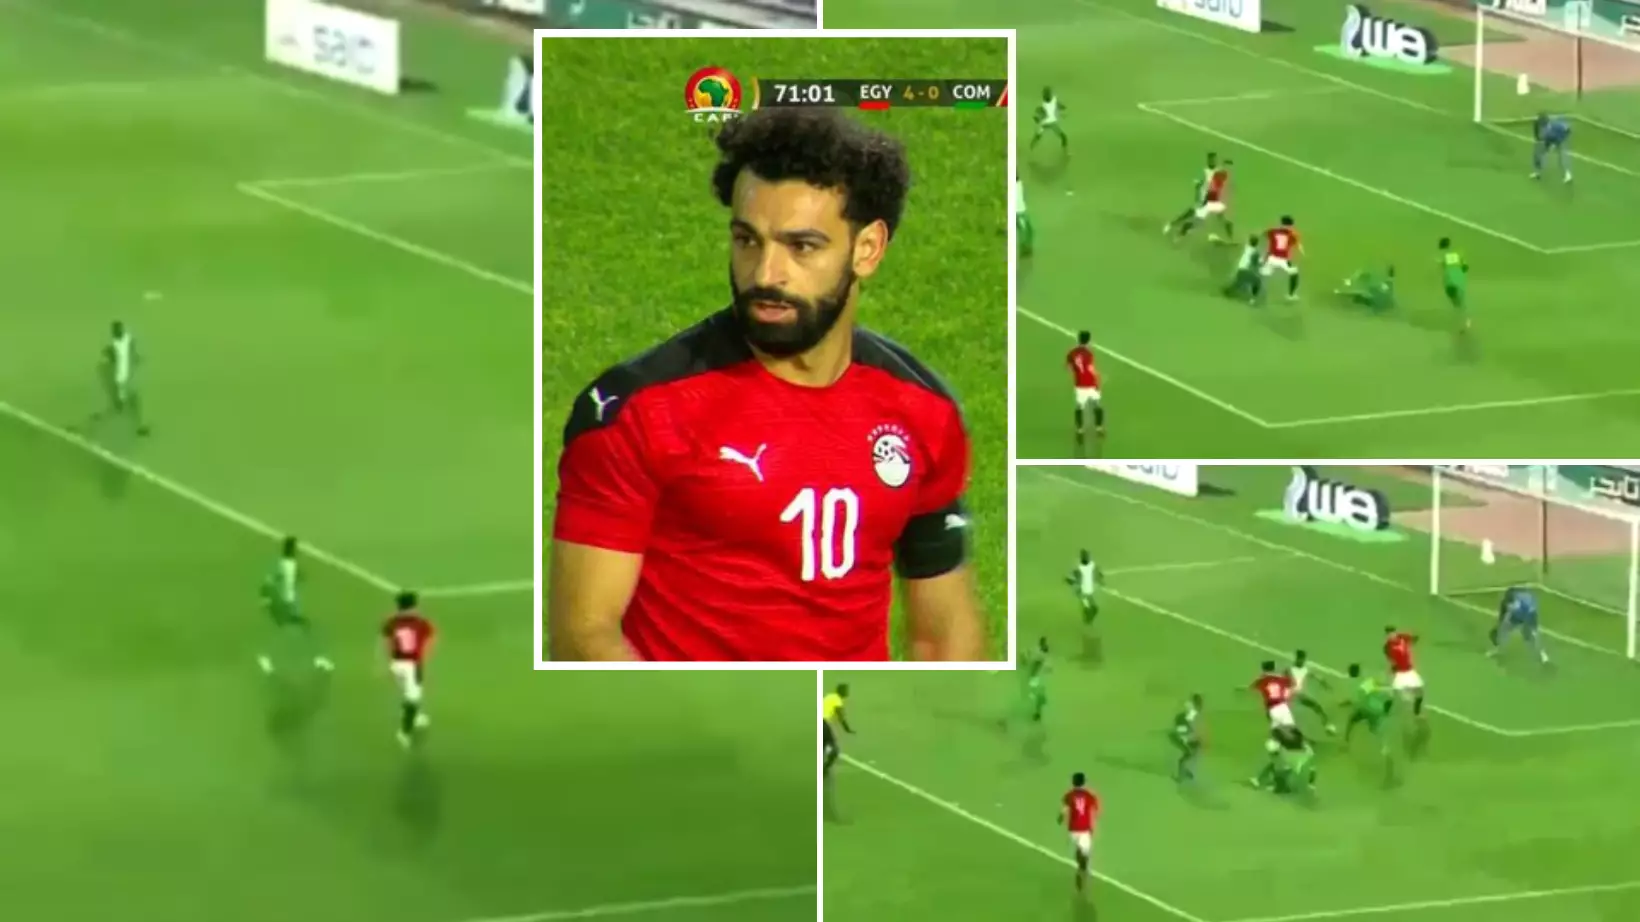 Mohamed Salah Does His Best Lionel Messi Impression By Dribbling Past Four Players Inside The Box